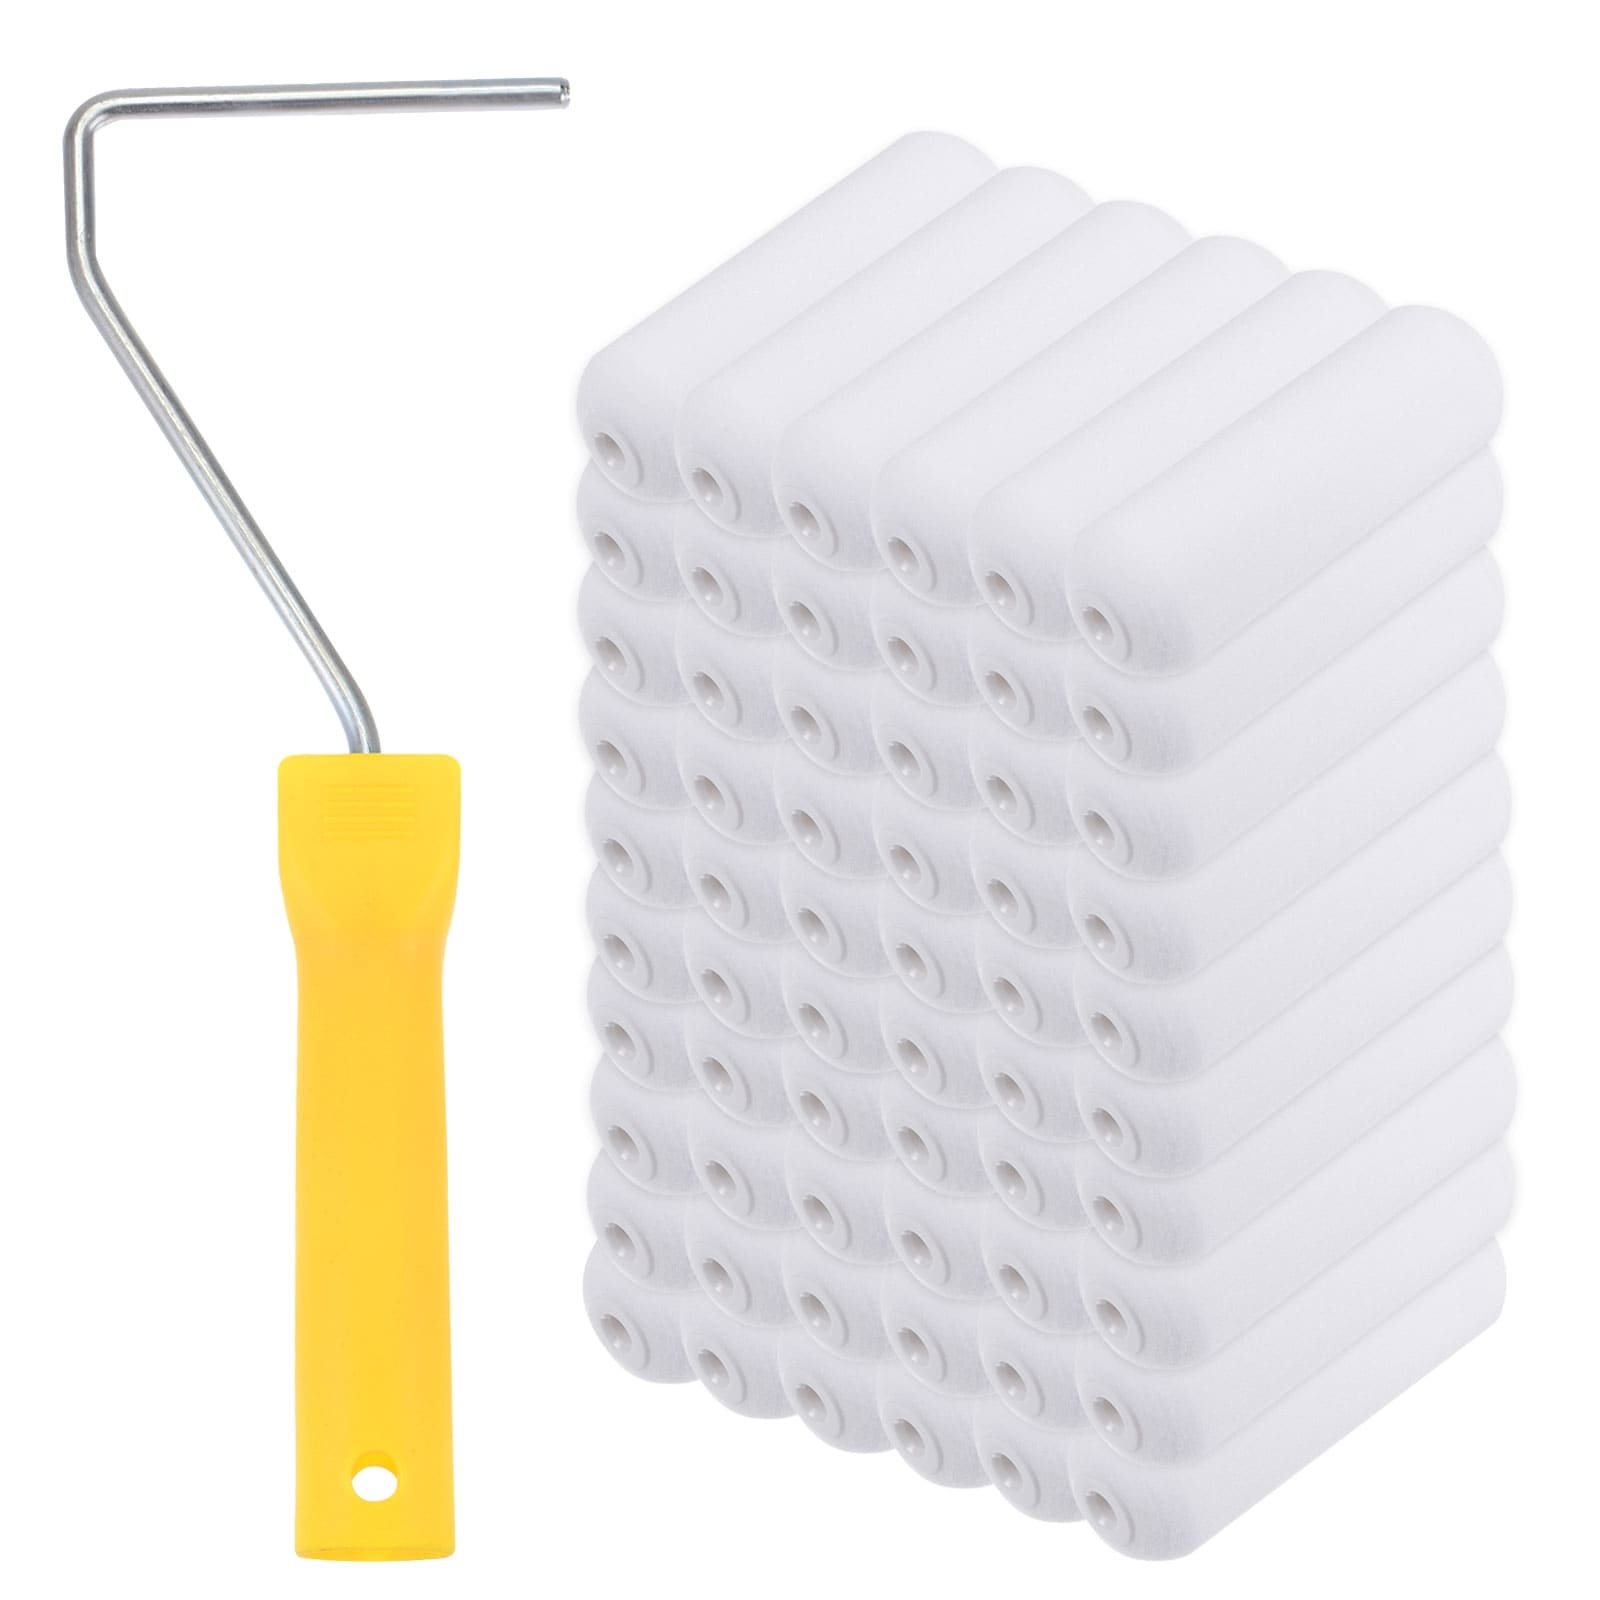 Paint Roller Kit 50pcs 4 inch Sponge Small Paint Roller Brush with Handle - Yellow, White